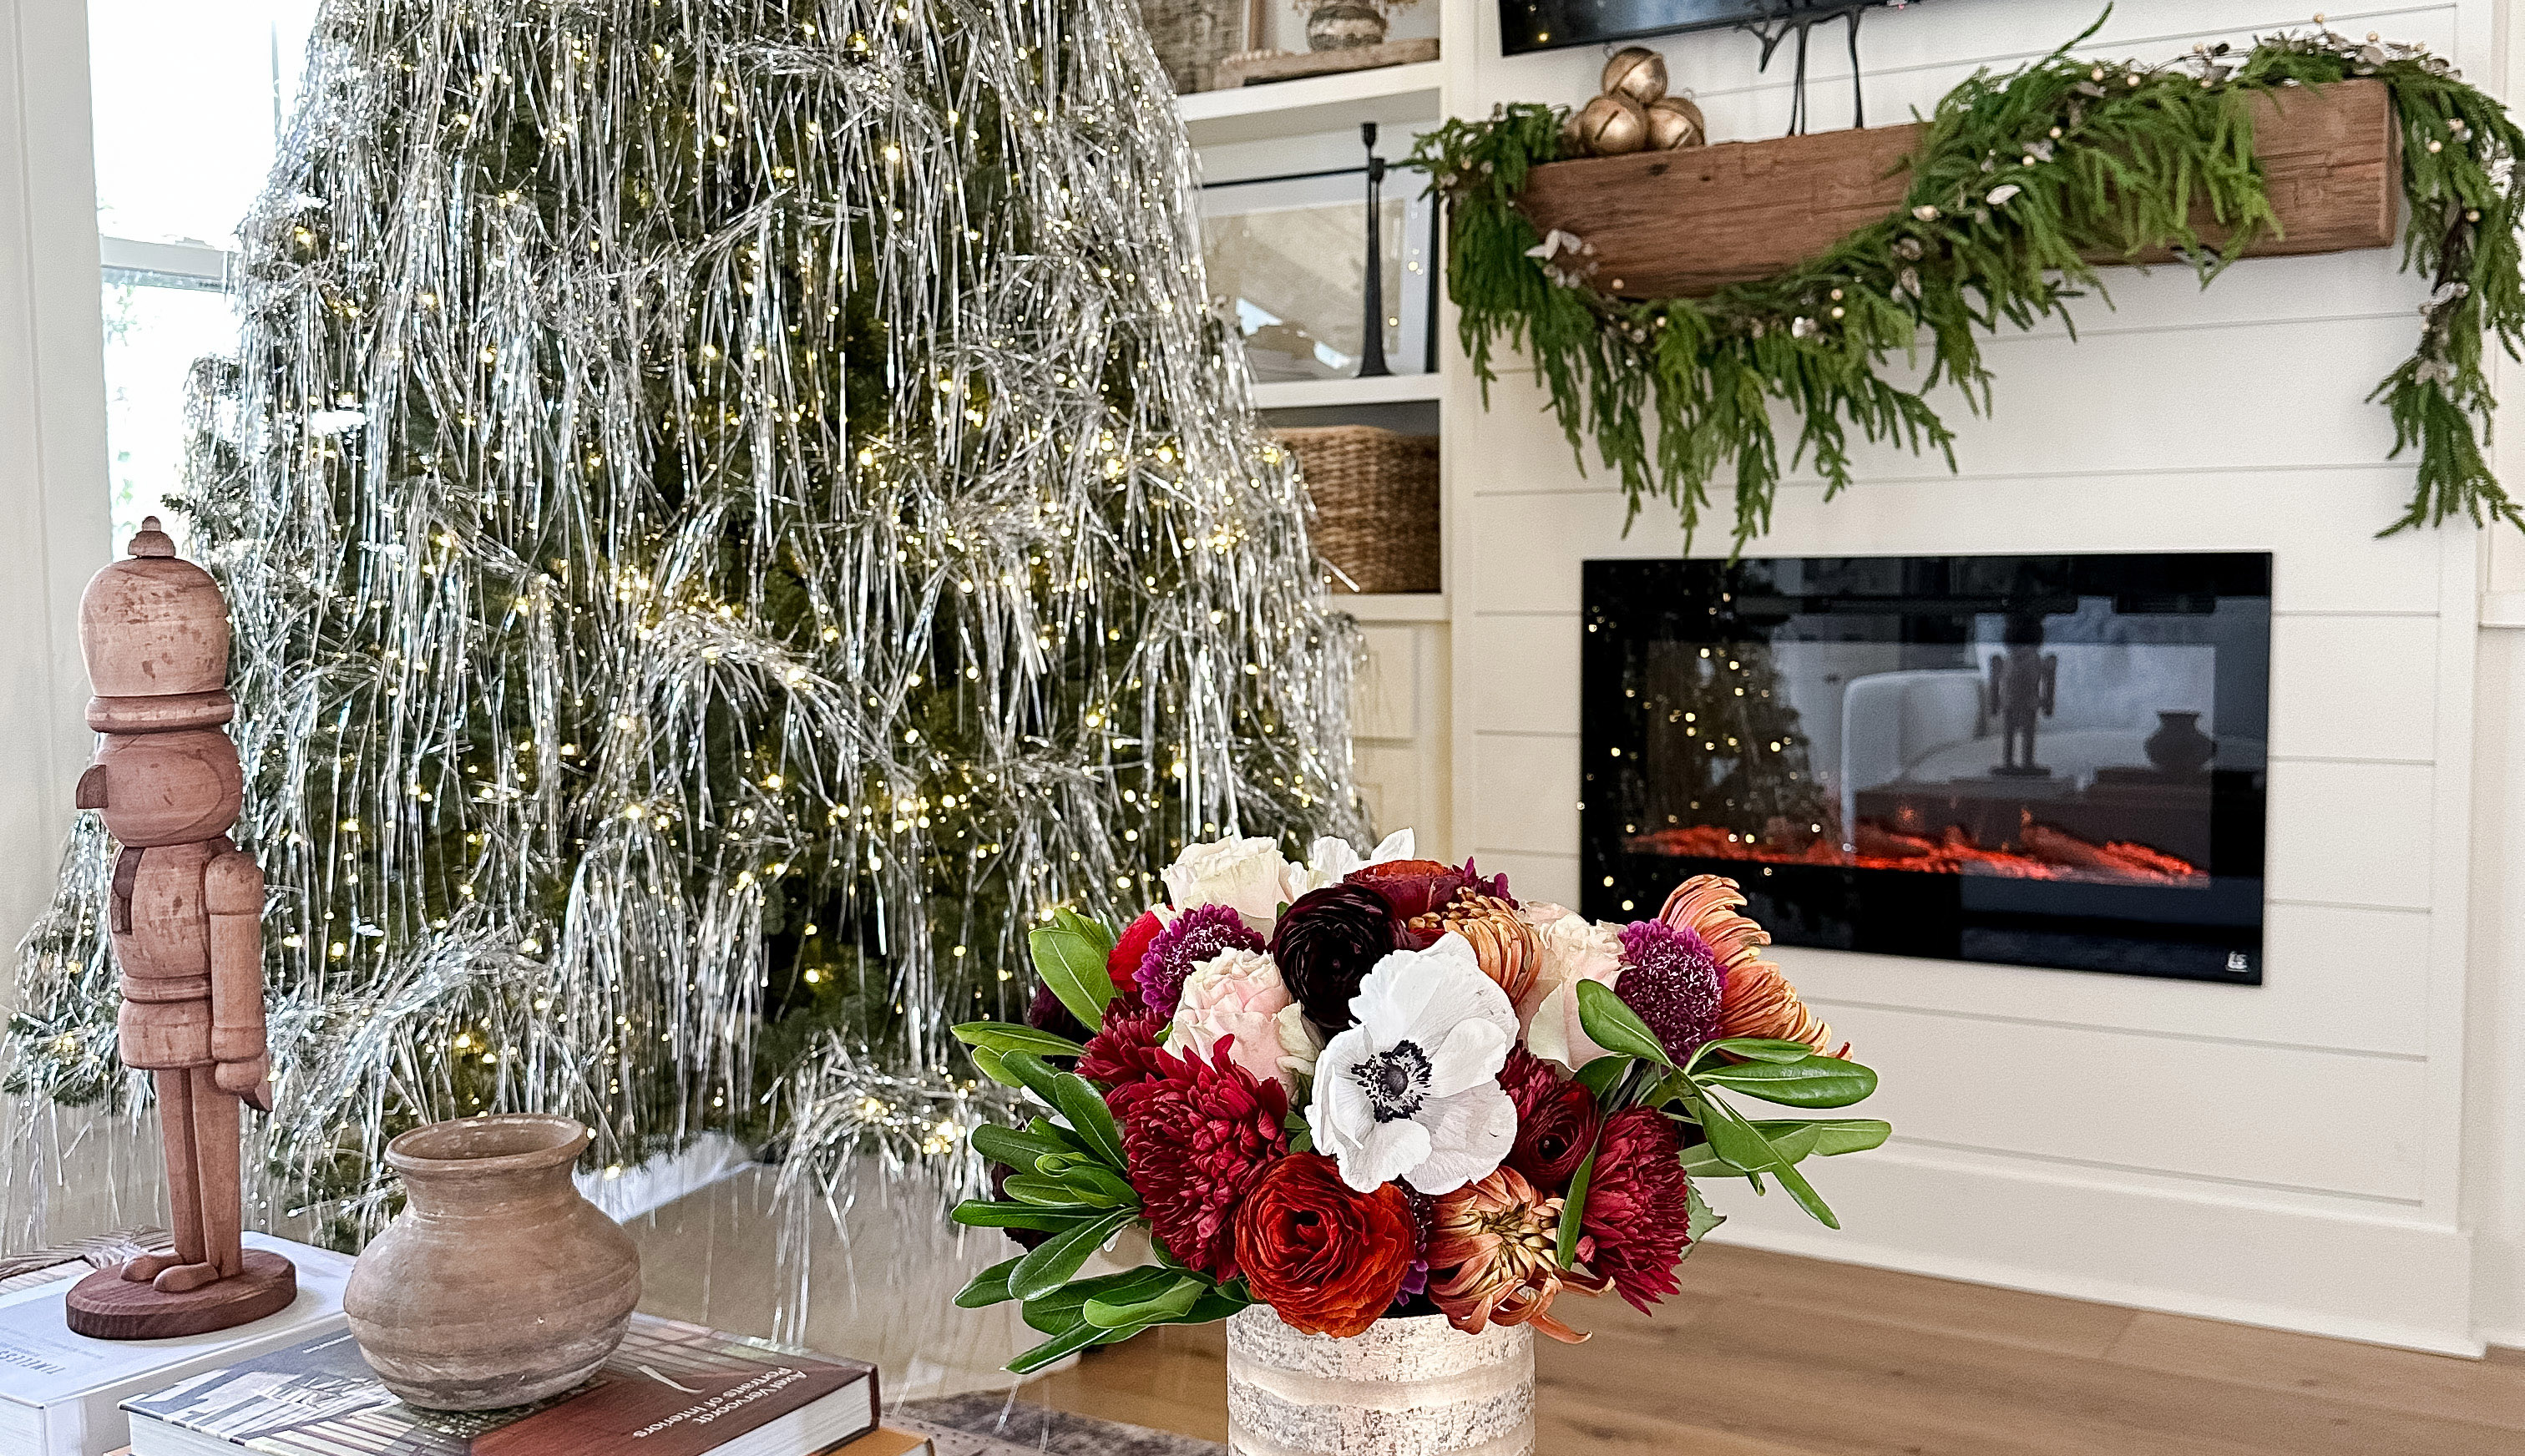 Room decorated for Christmas 2022 with beautiful holiday flowers and a tinsel decorated Christmas tree